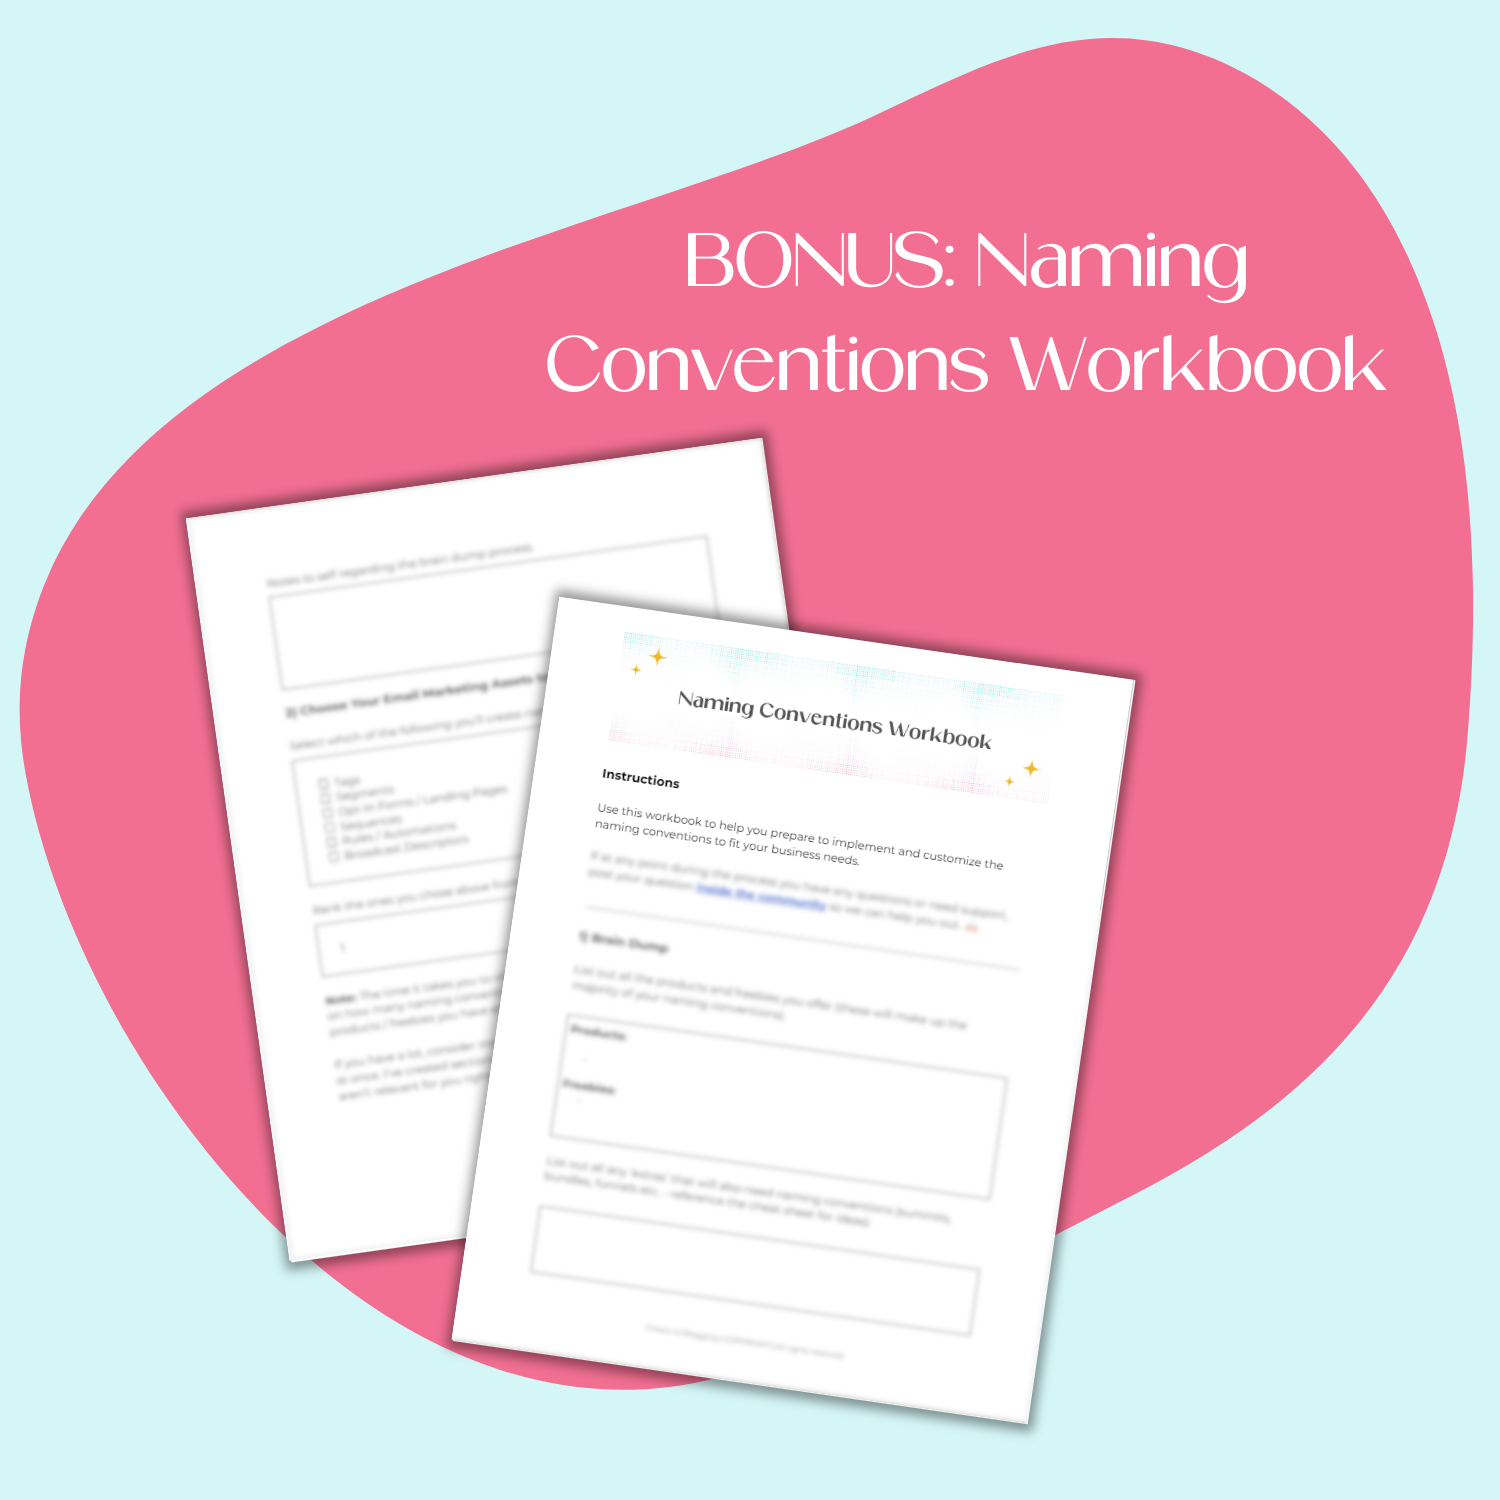 A document mockup displaying the bonus Naming Conventions Workbook.